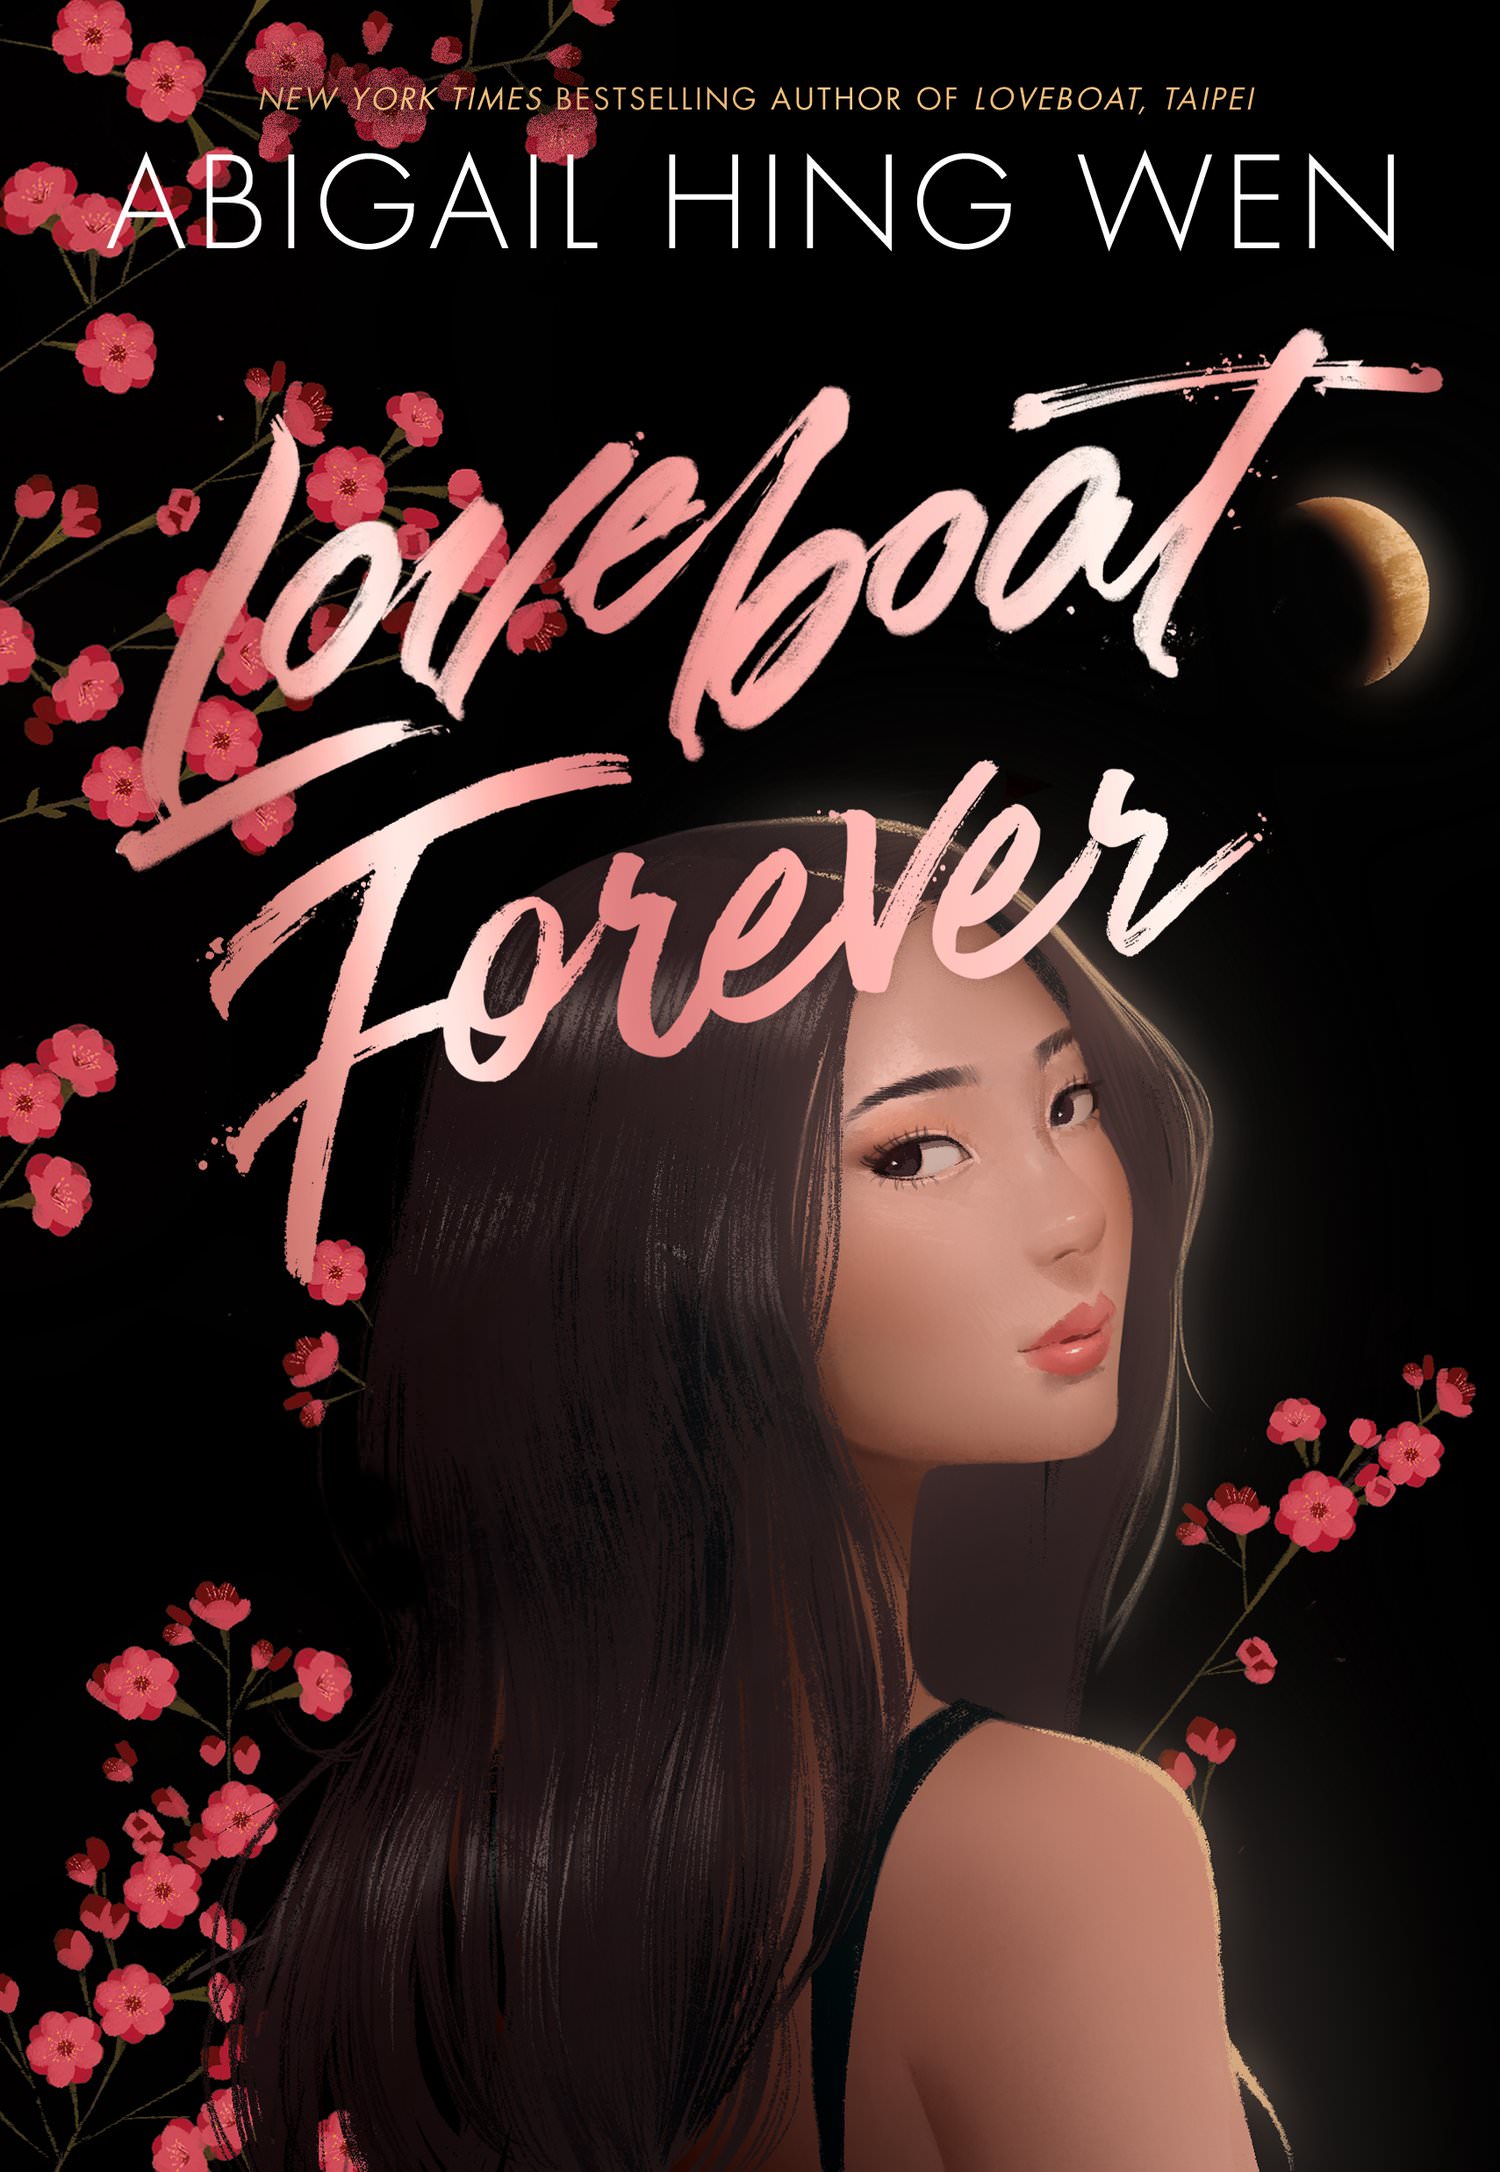 Loveboat Forever by Abigail Hing Wen